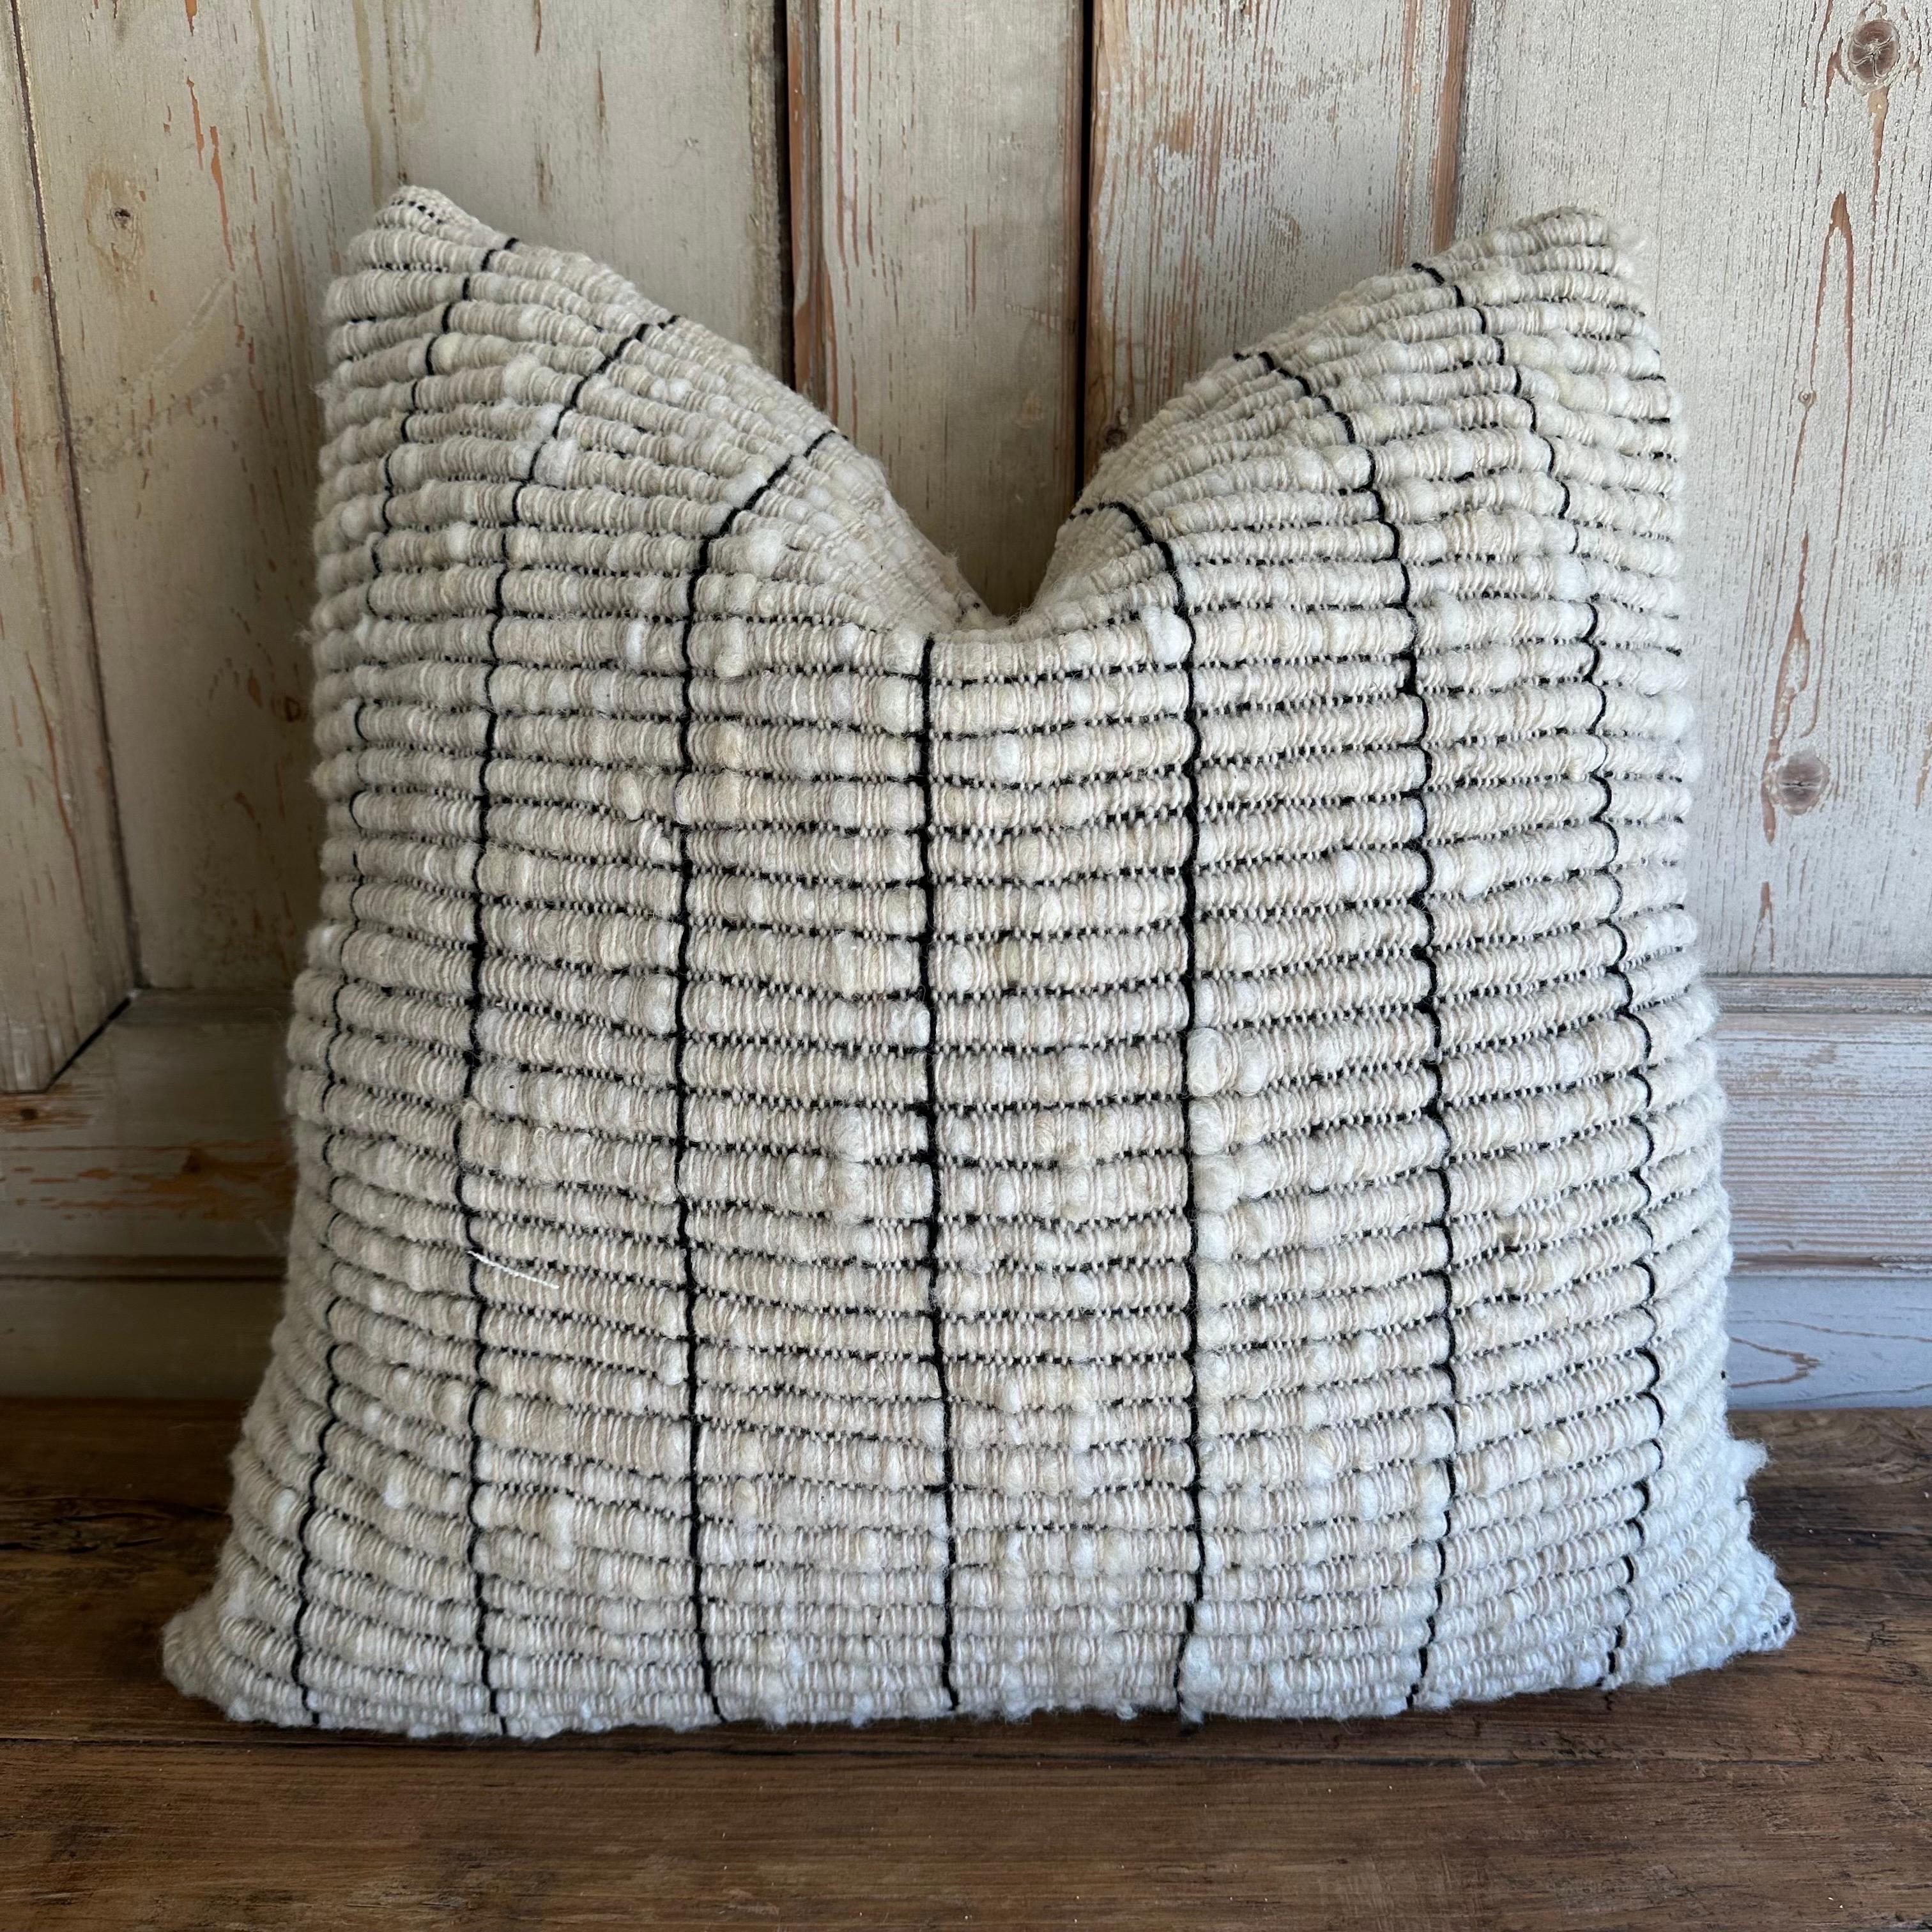 FELIZ WOOL PILLOW.
All of our products are commissioned and handmade by the craftswomen of Chiloé. The textiles are made with 100% wool from ’Chilota’ sheep, that are born and raised on the island.?The process by which these luxurious wool pieces